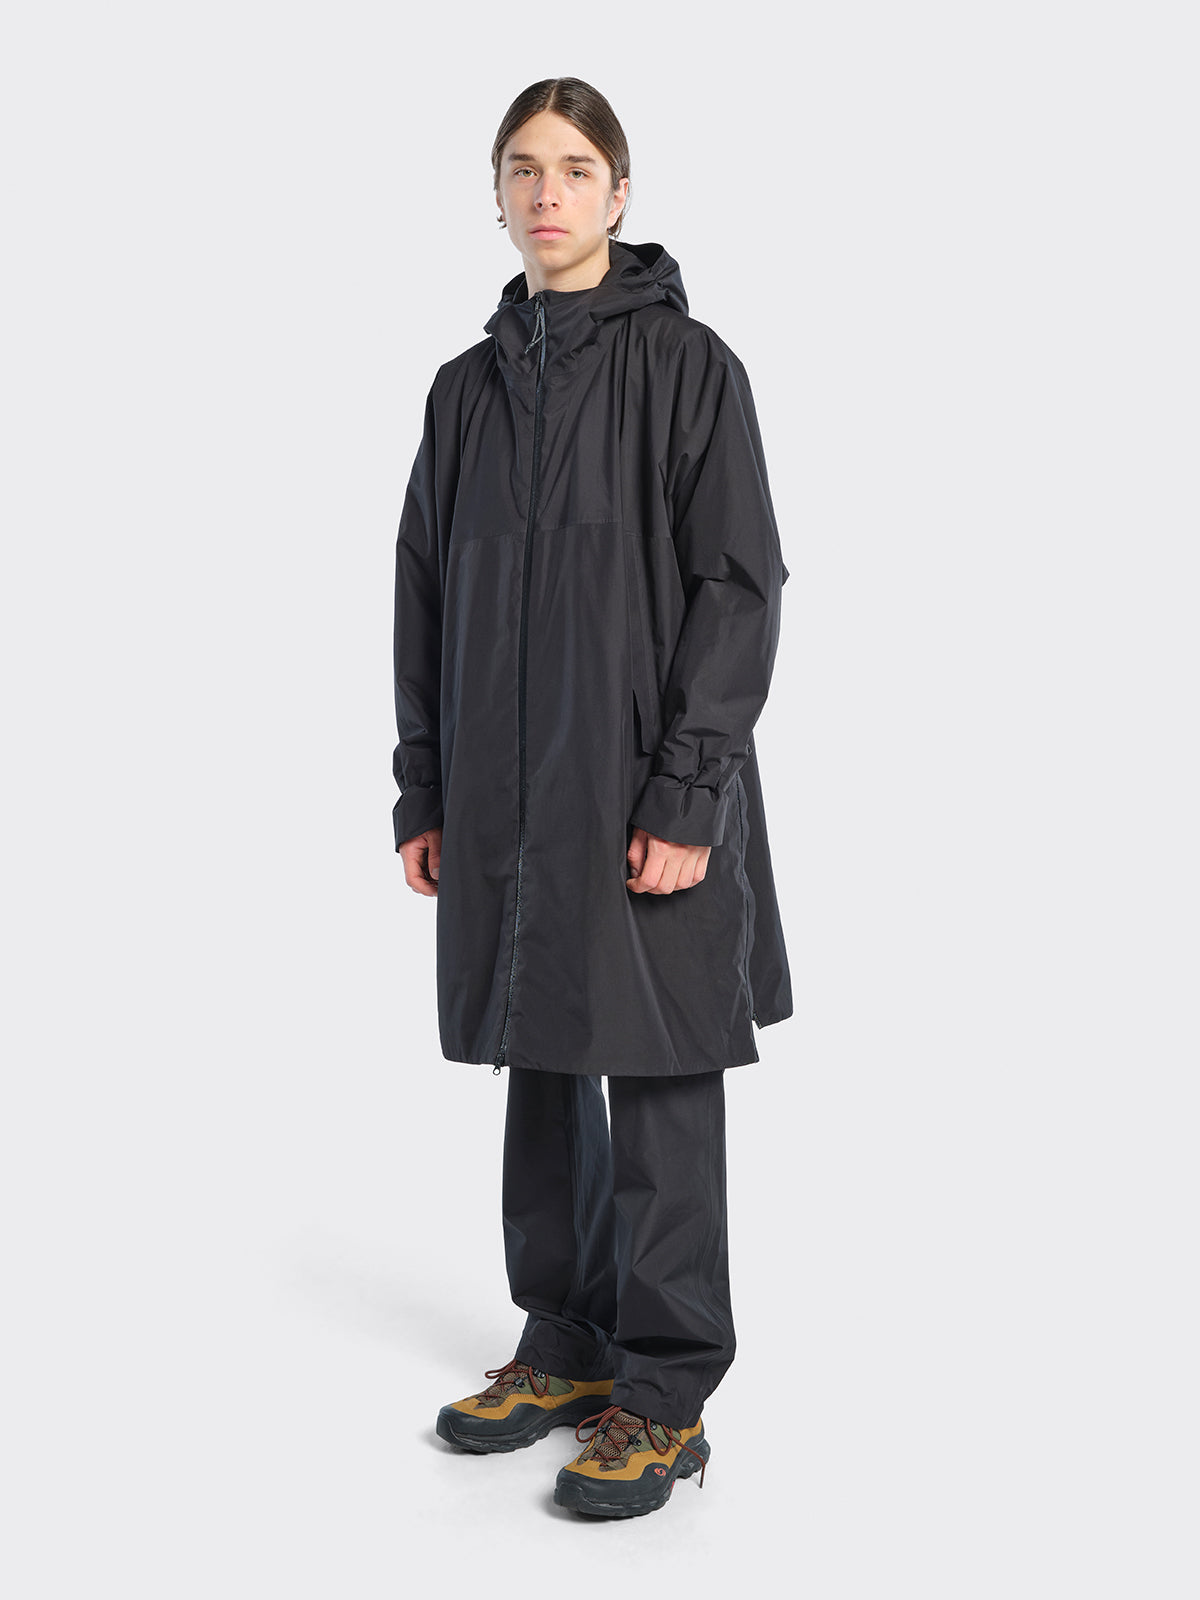 Man wearing Fjord IS coat from Blæst in Black